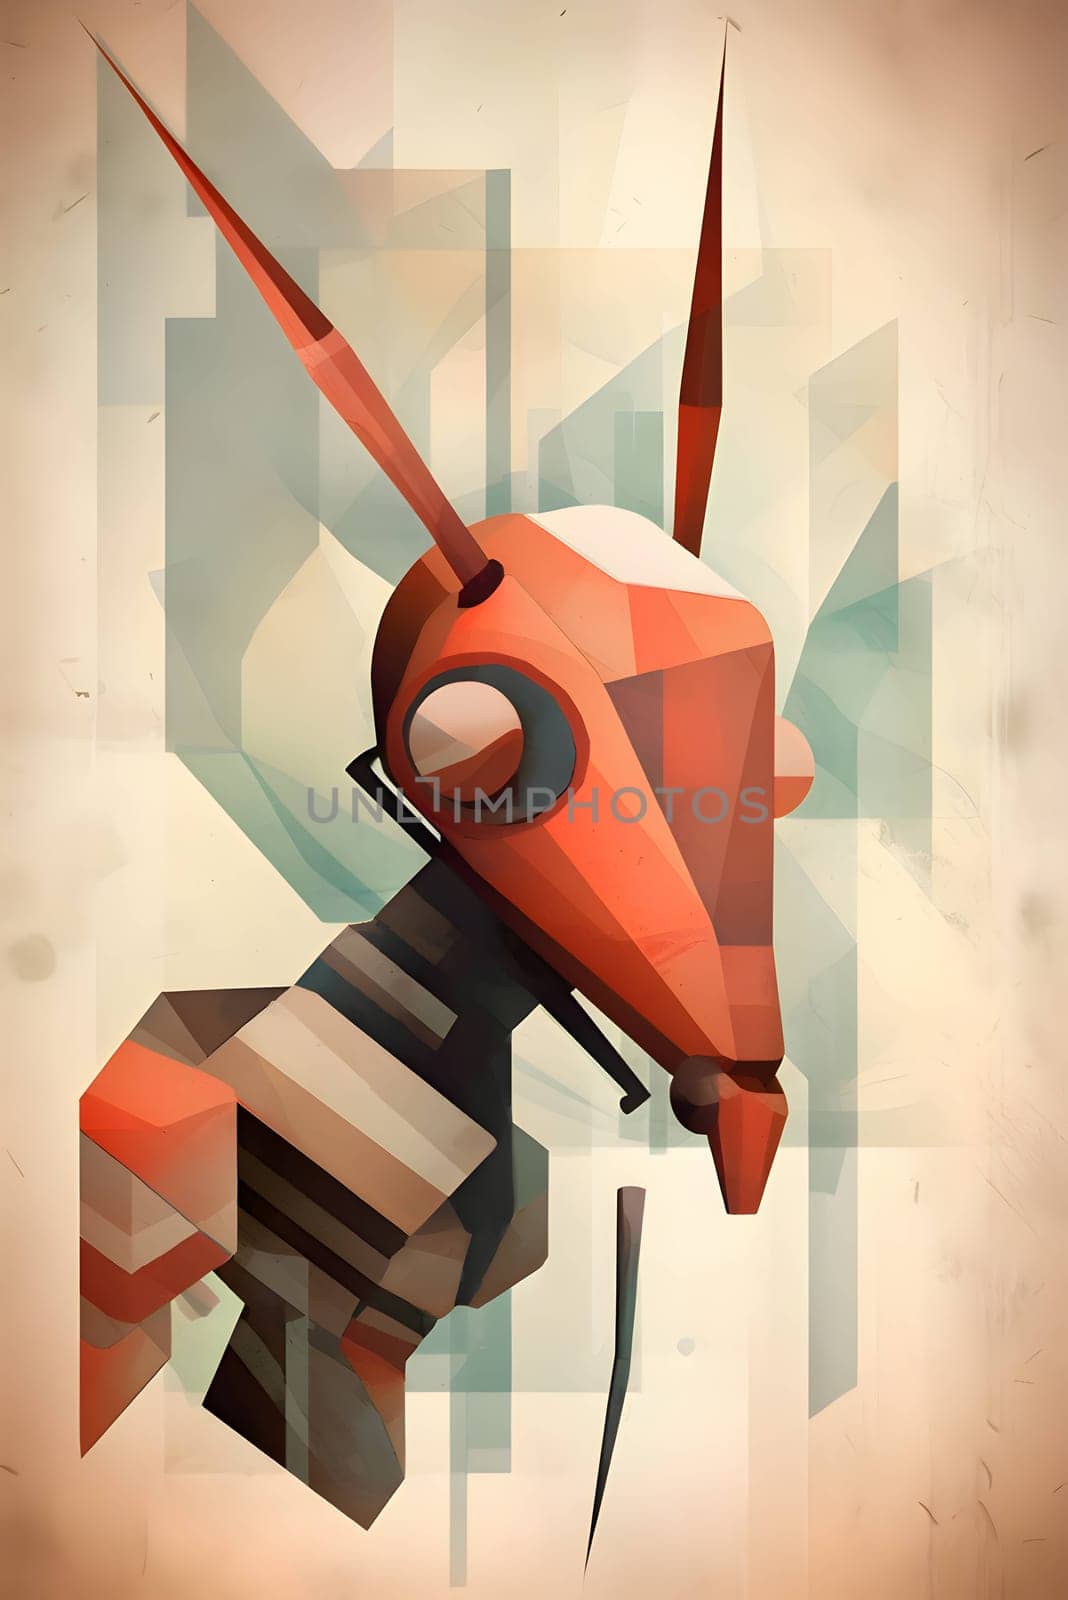 Abstract illustration: Retro futuristic spaceship with low poly background. Vector illustration. Eps 10